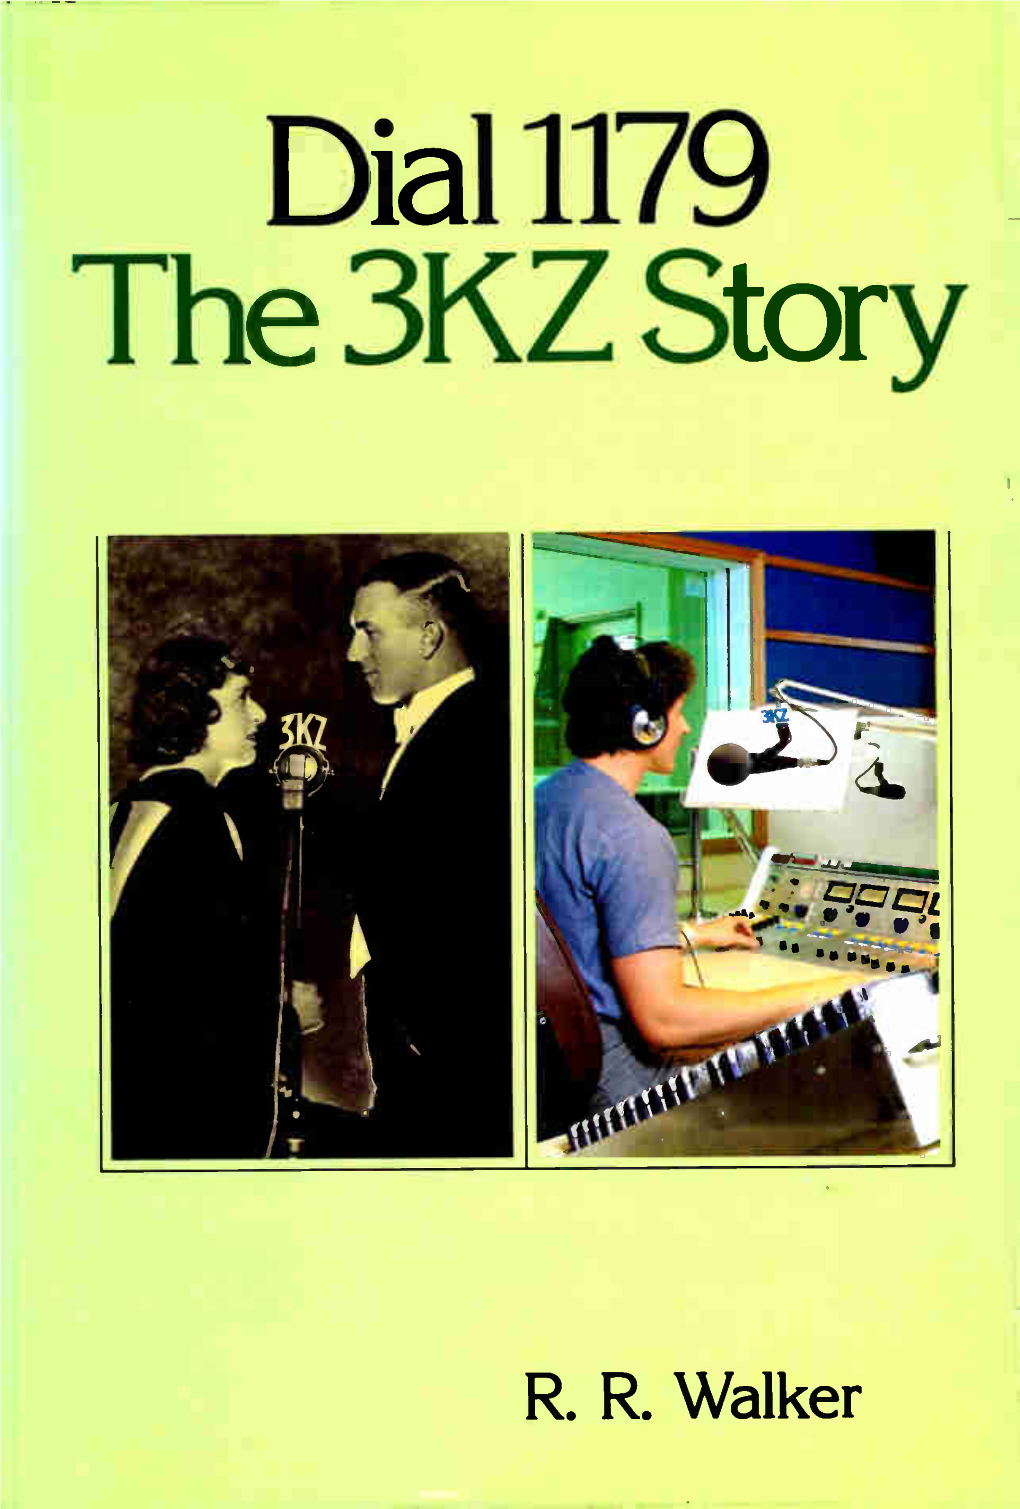 Dial 1179 the 3KZ Story